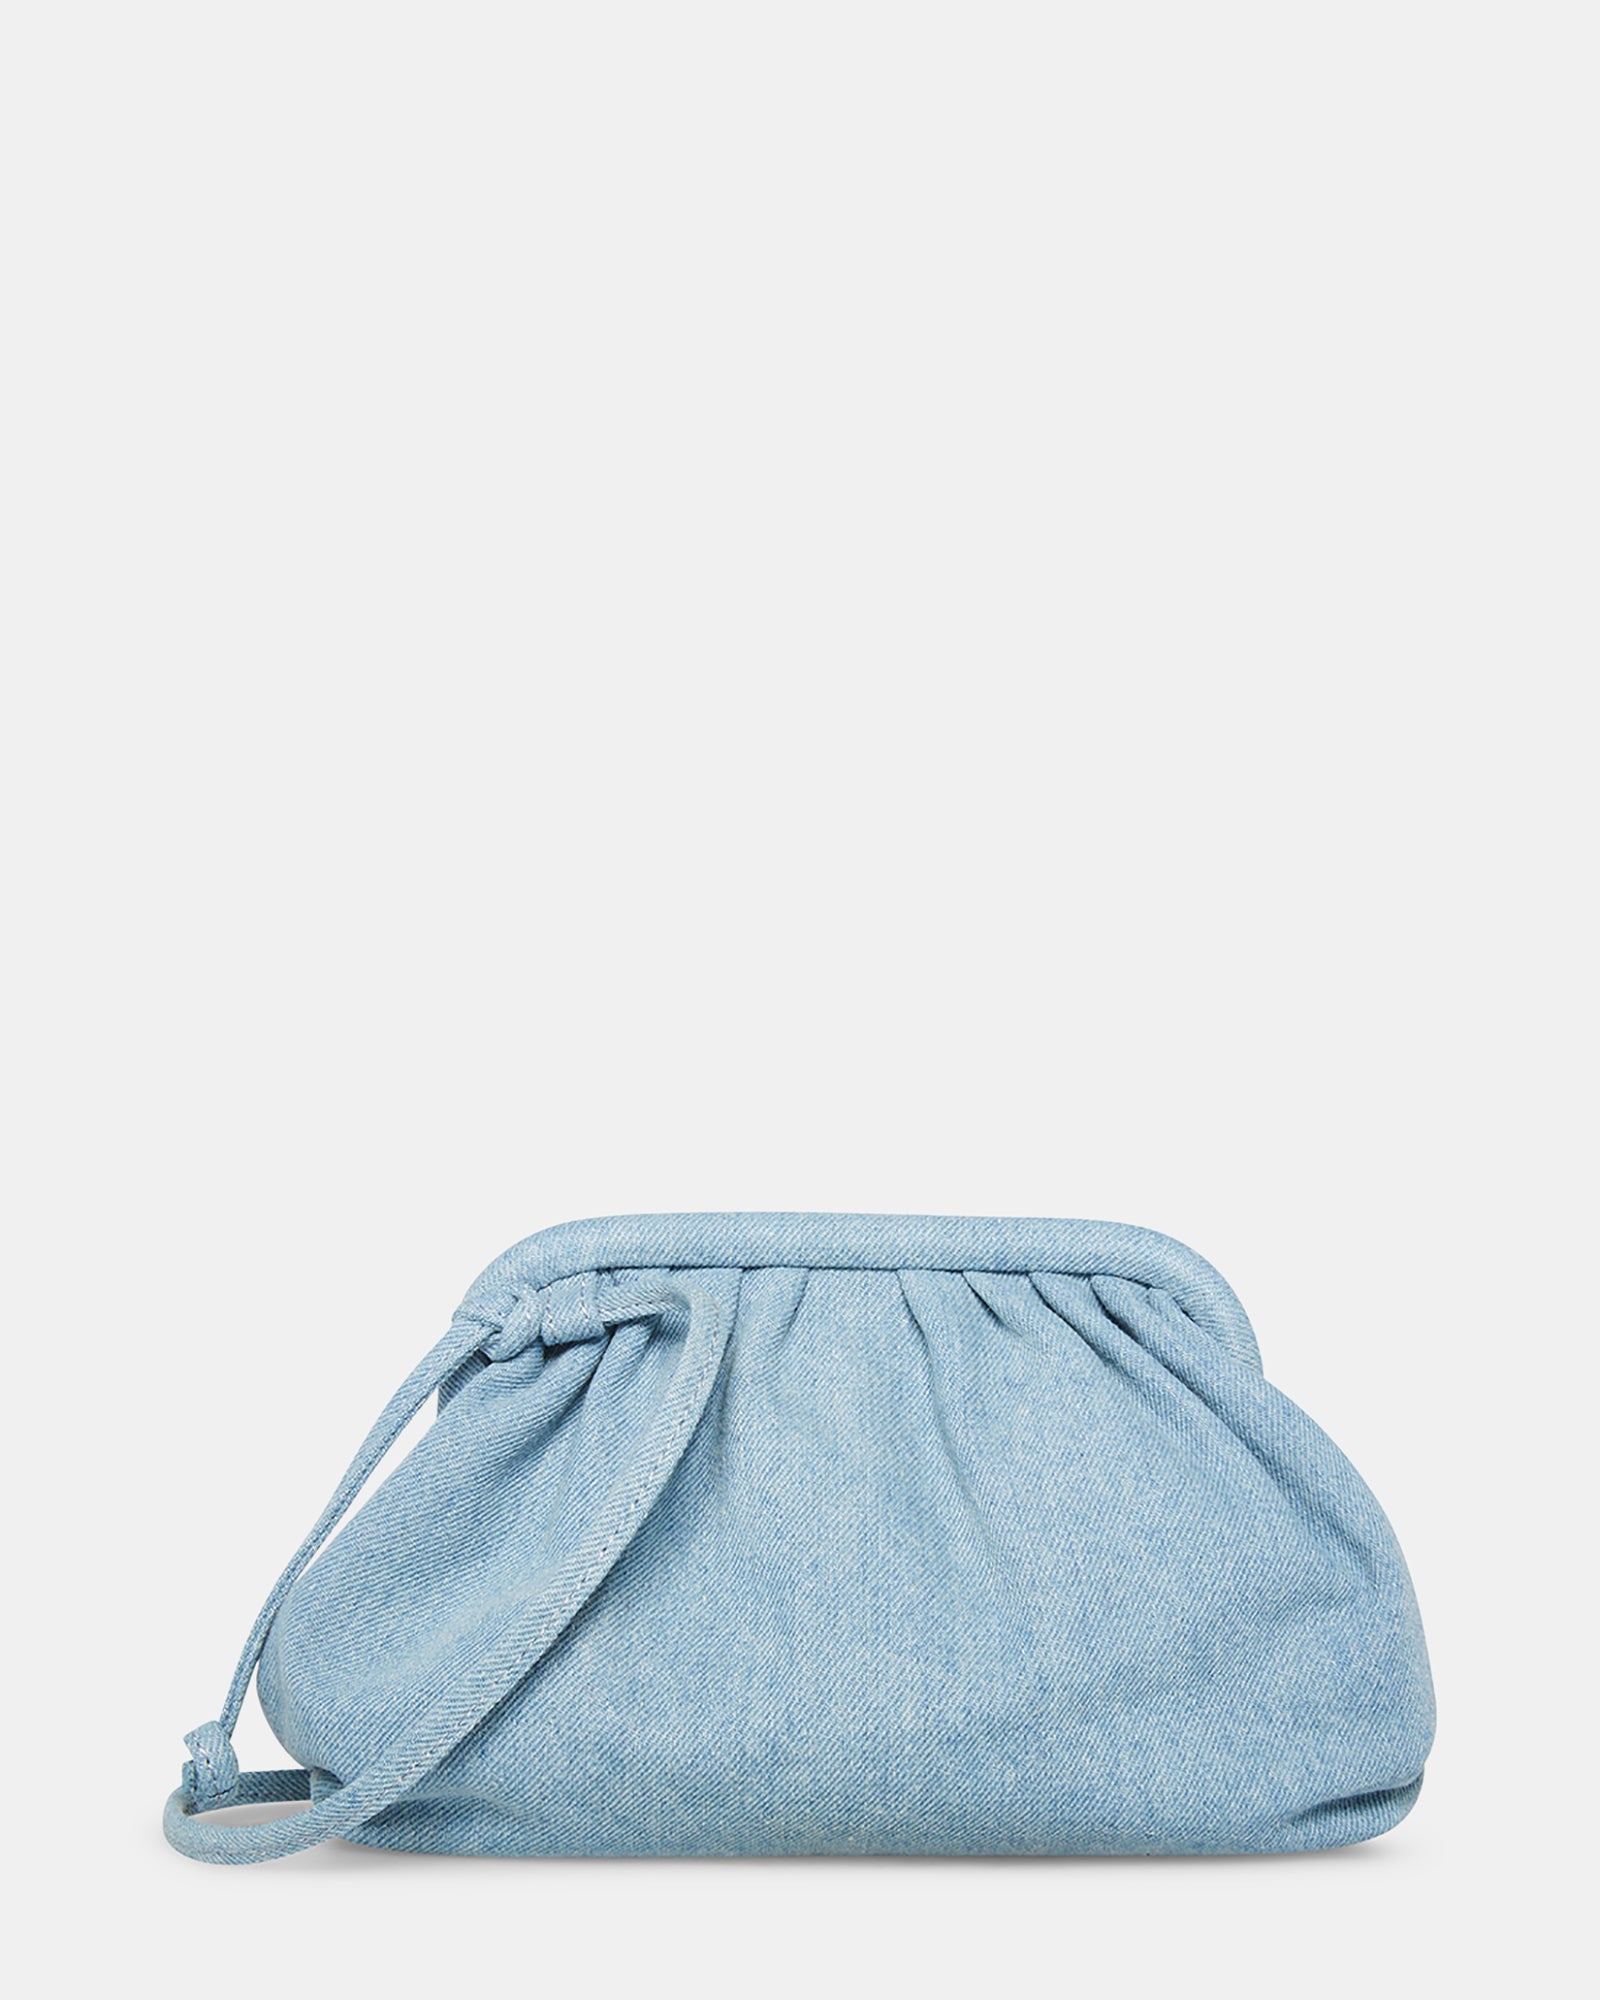 The Small Pouch denim bag